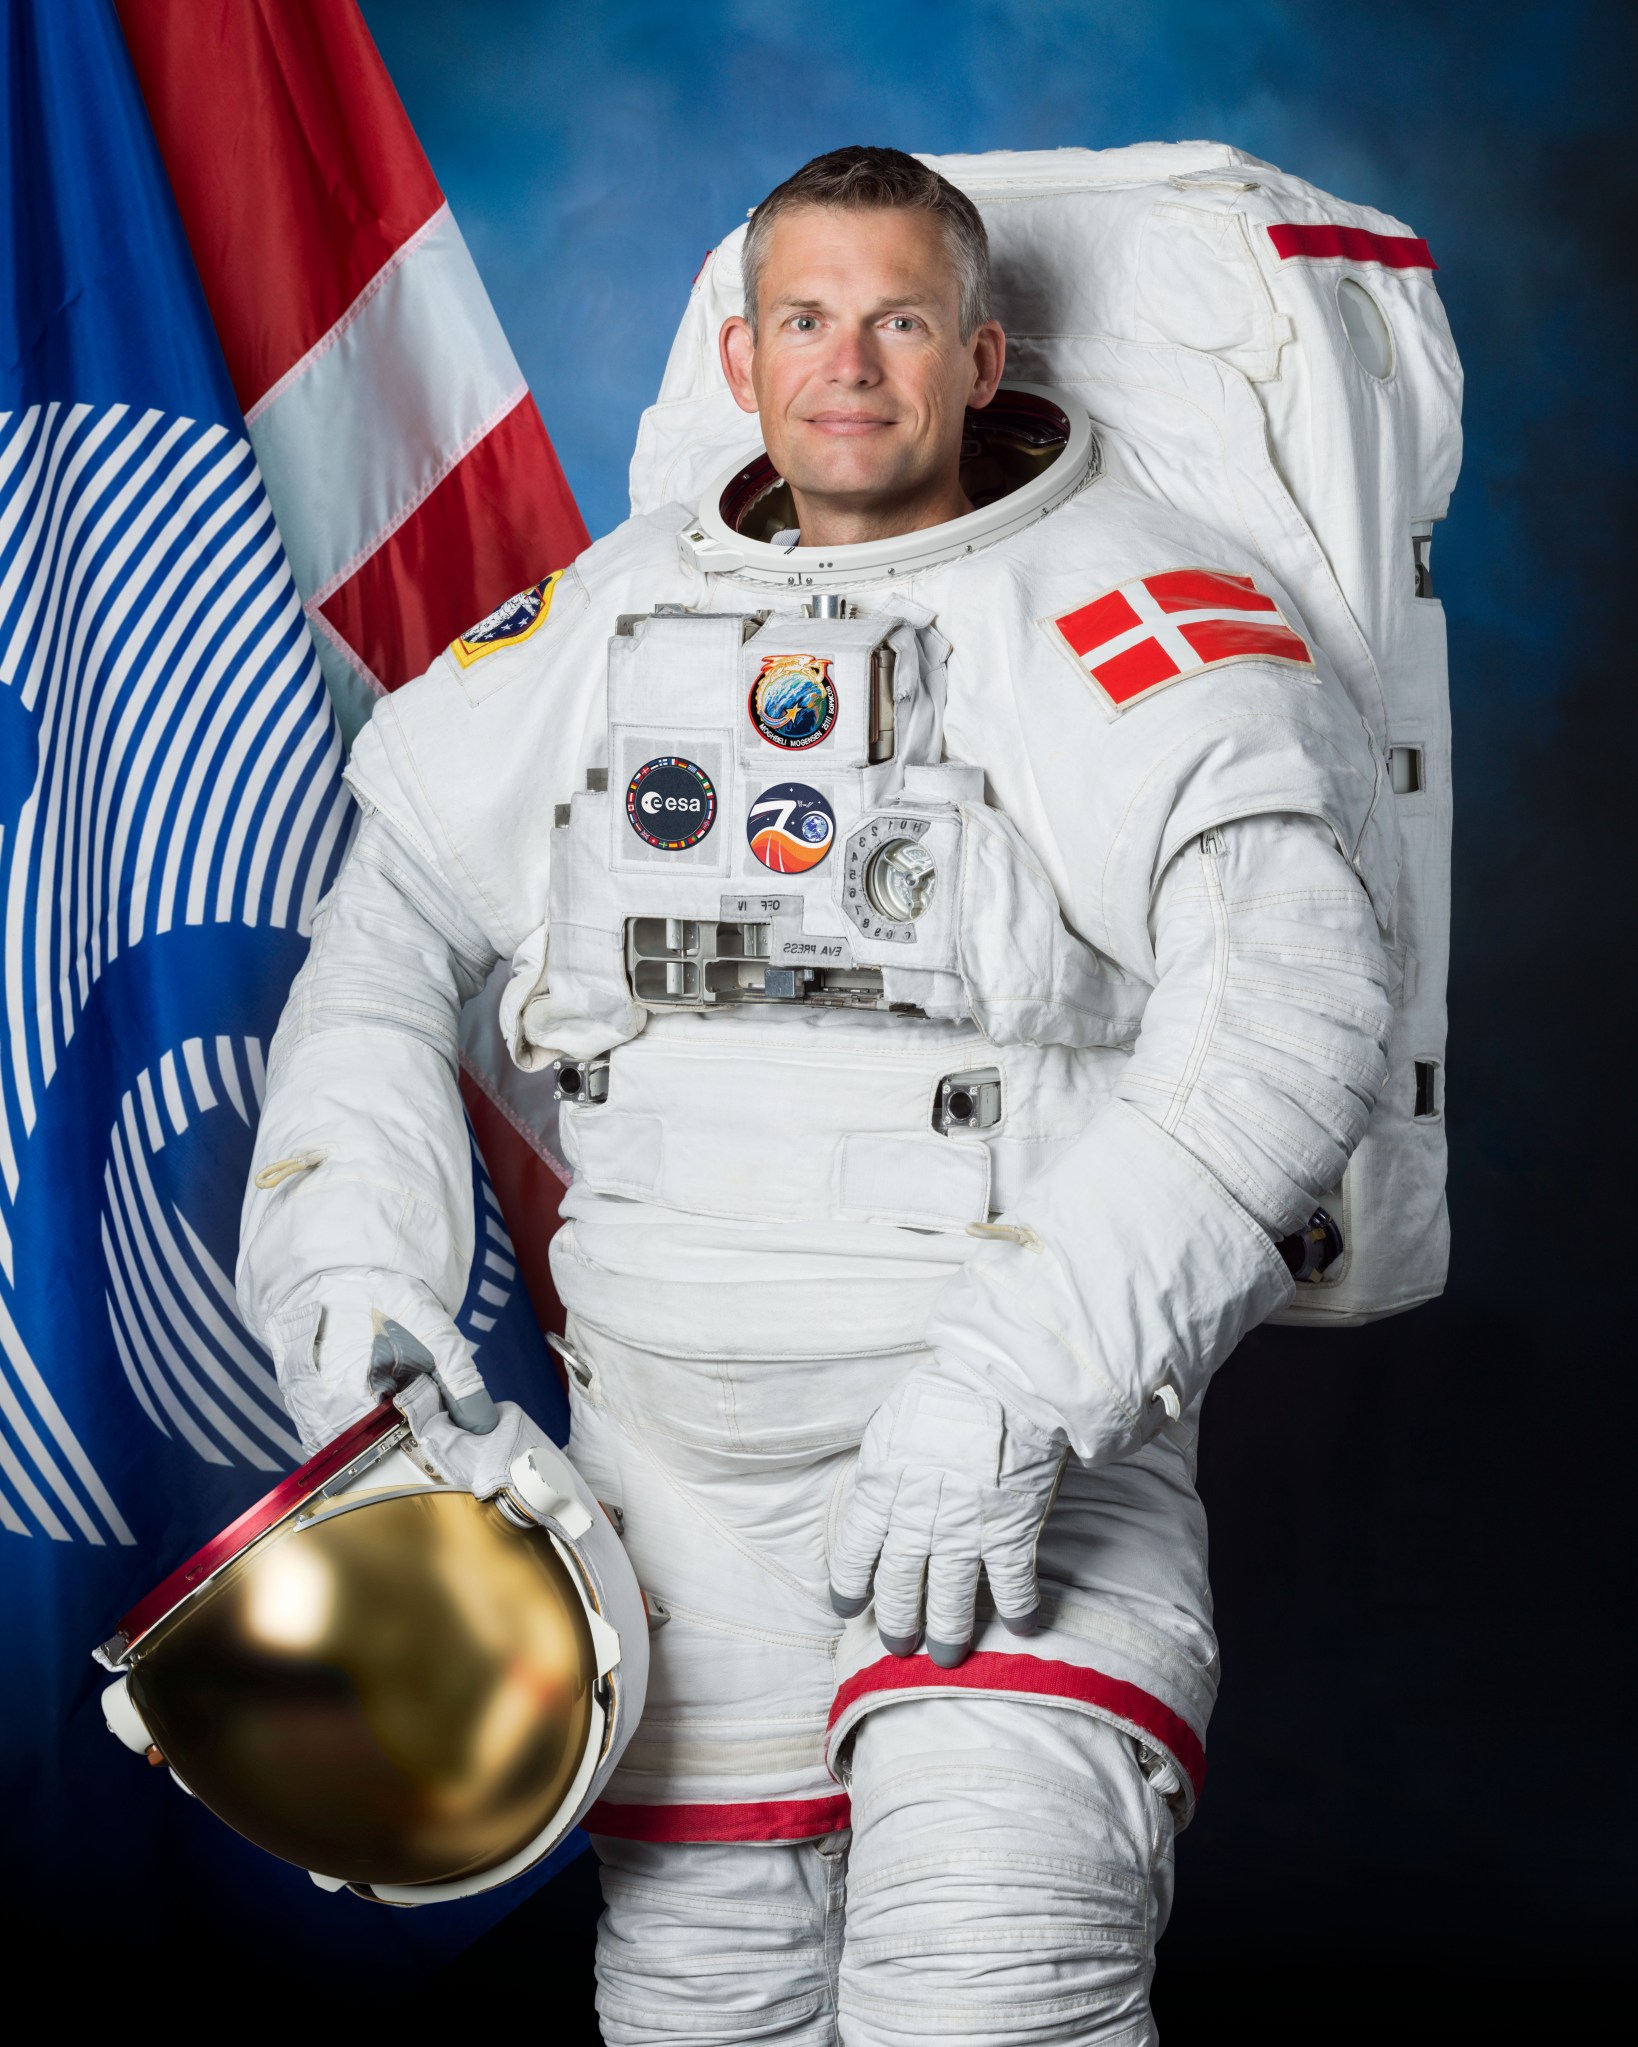 Official portrait of ESA (European Space Agency) astronaut Andreas Mogensen in a spacesuit.